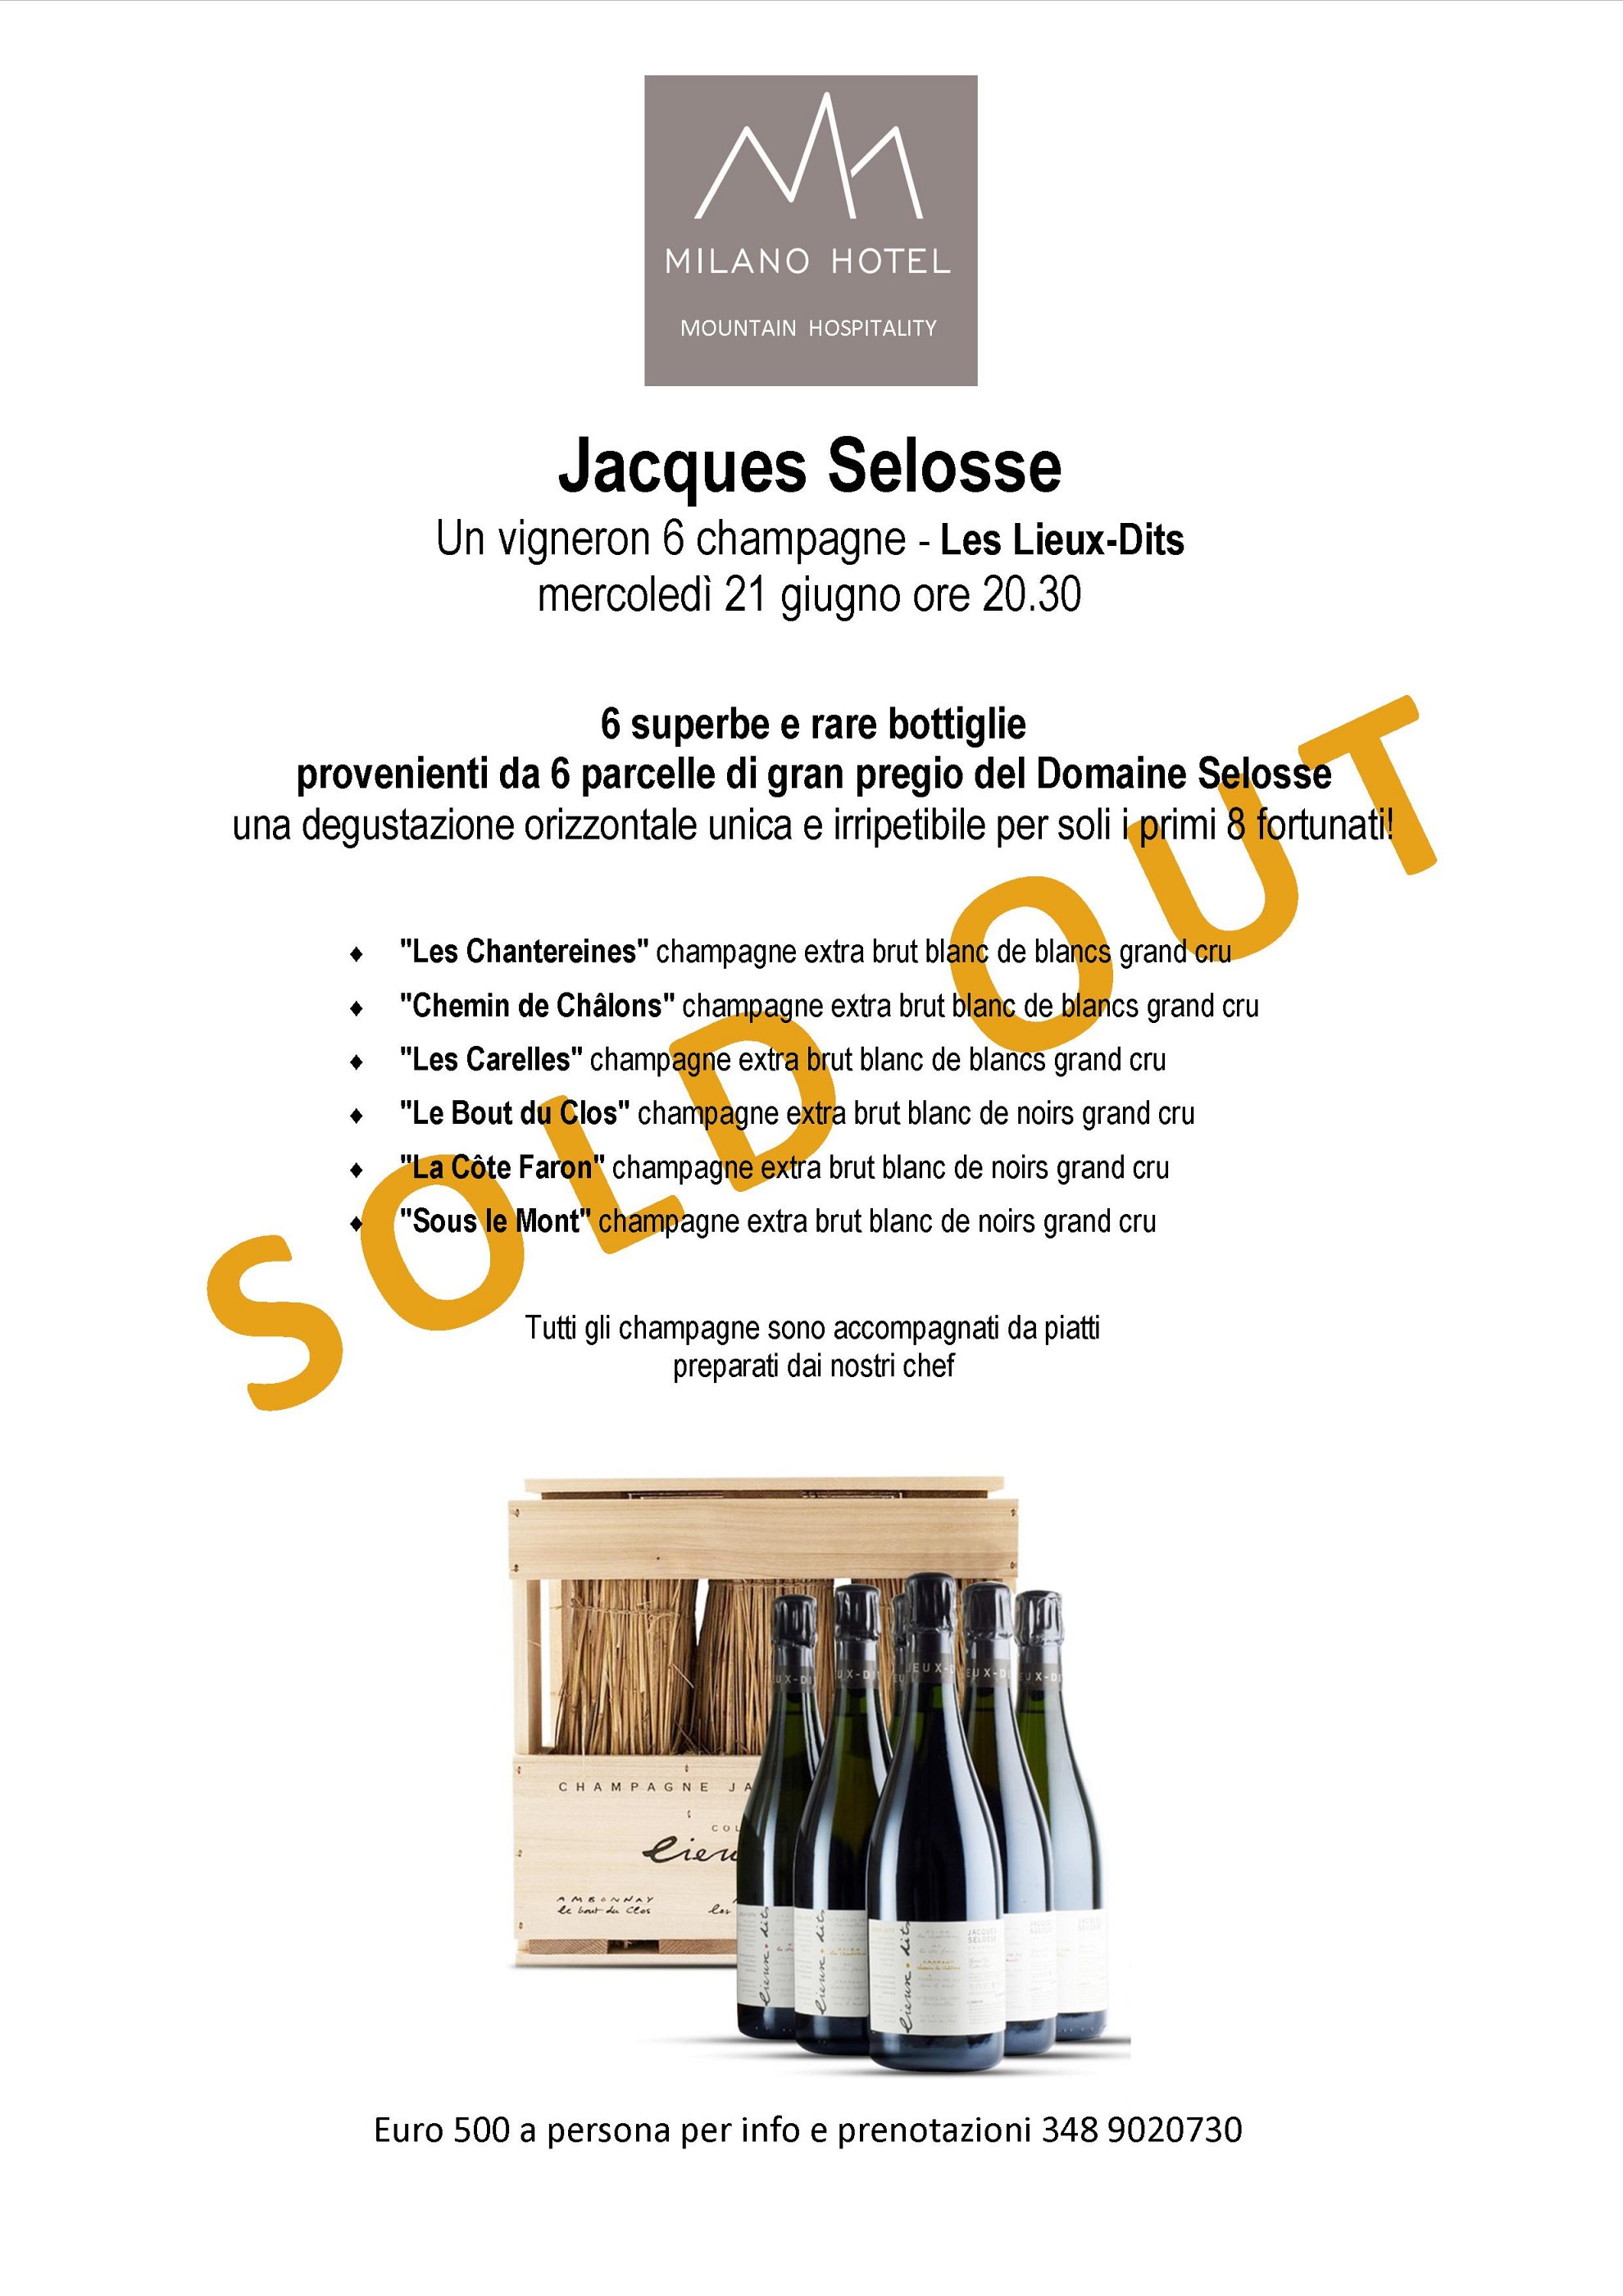 21 giugno jacques selosse sold out